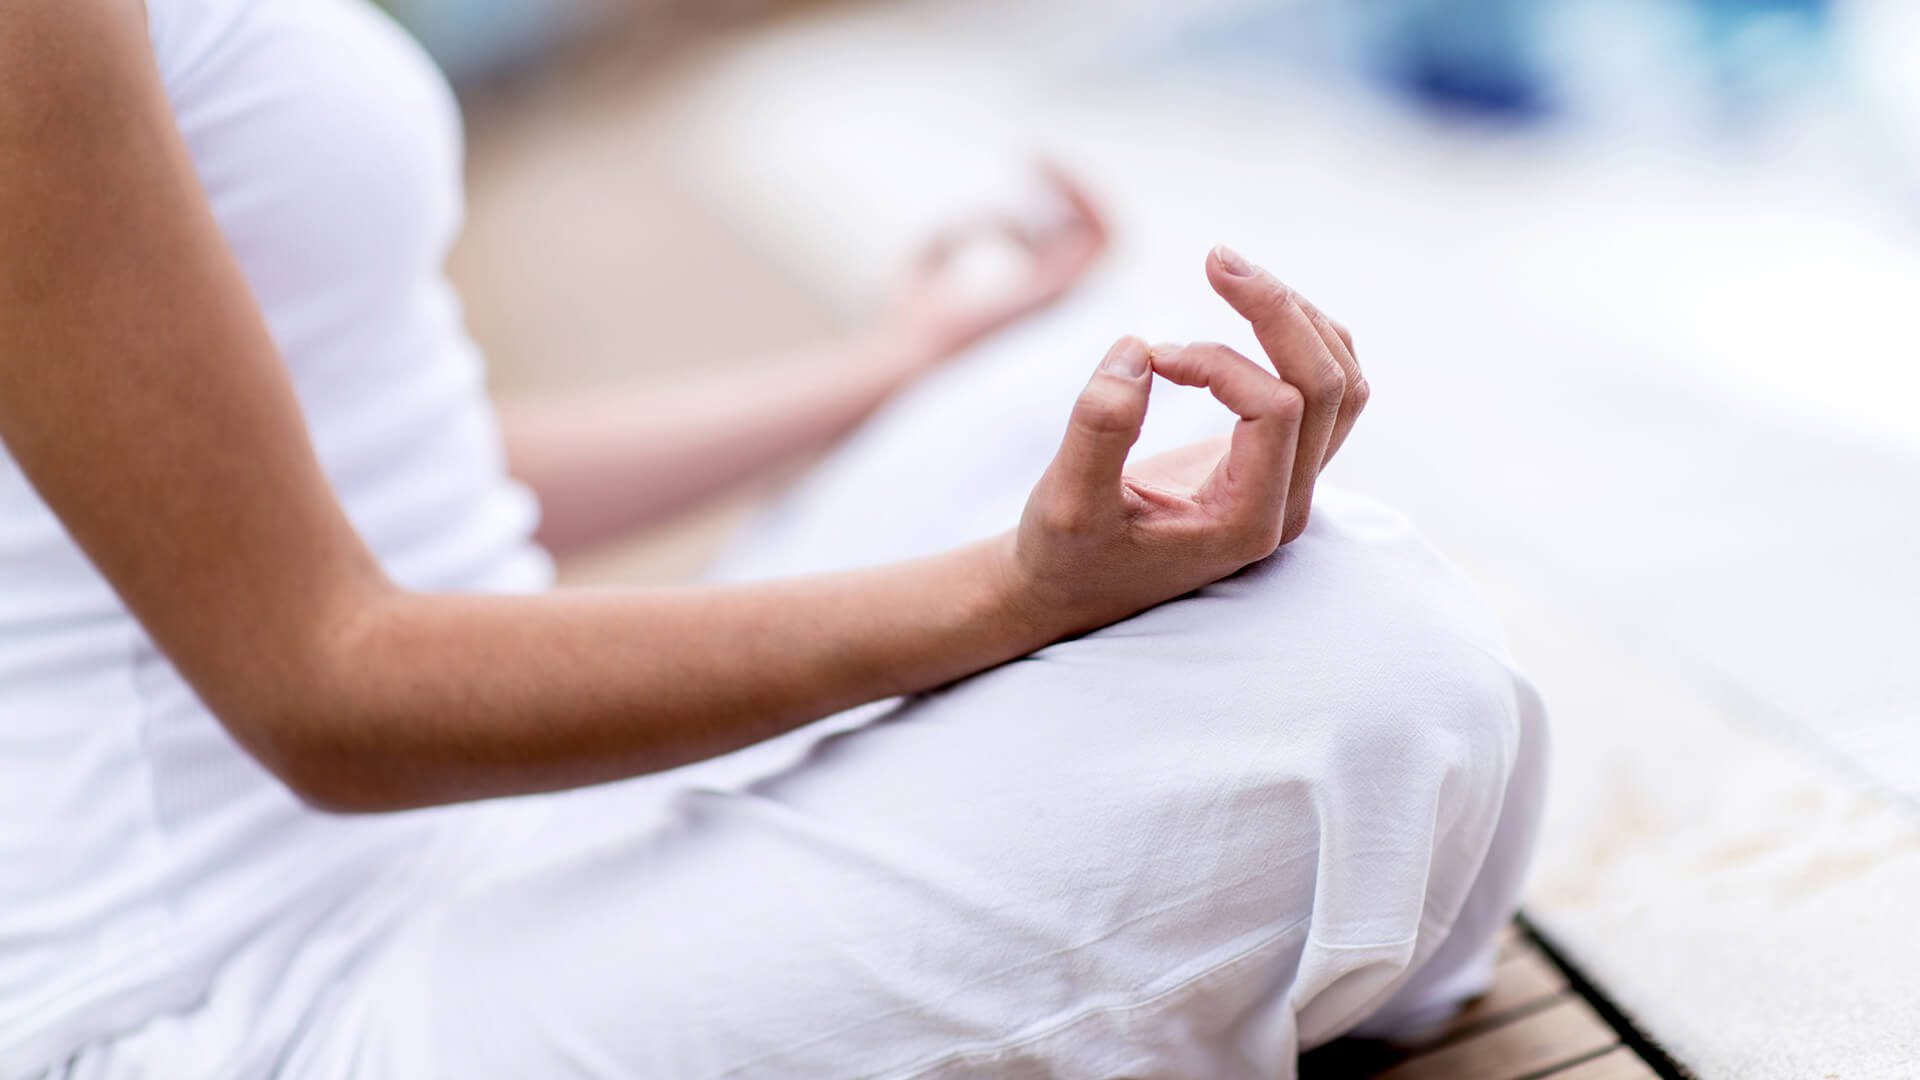 how safe is it for pregnant women to attend a Yoga class?